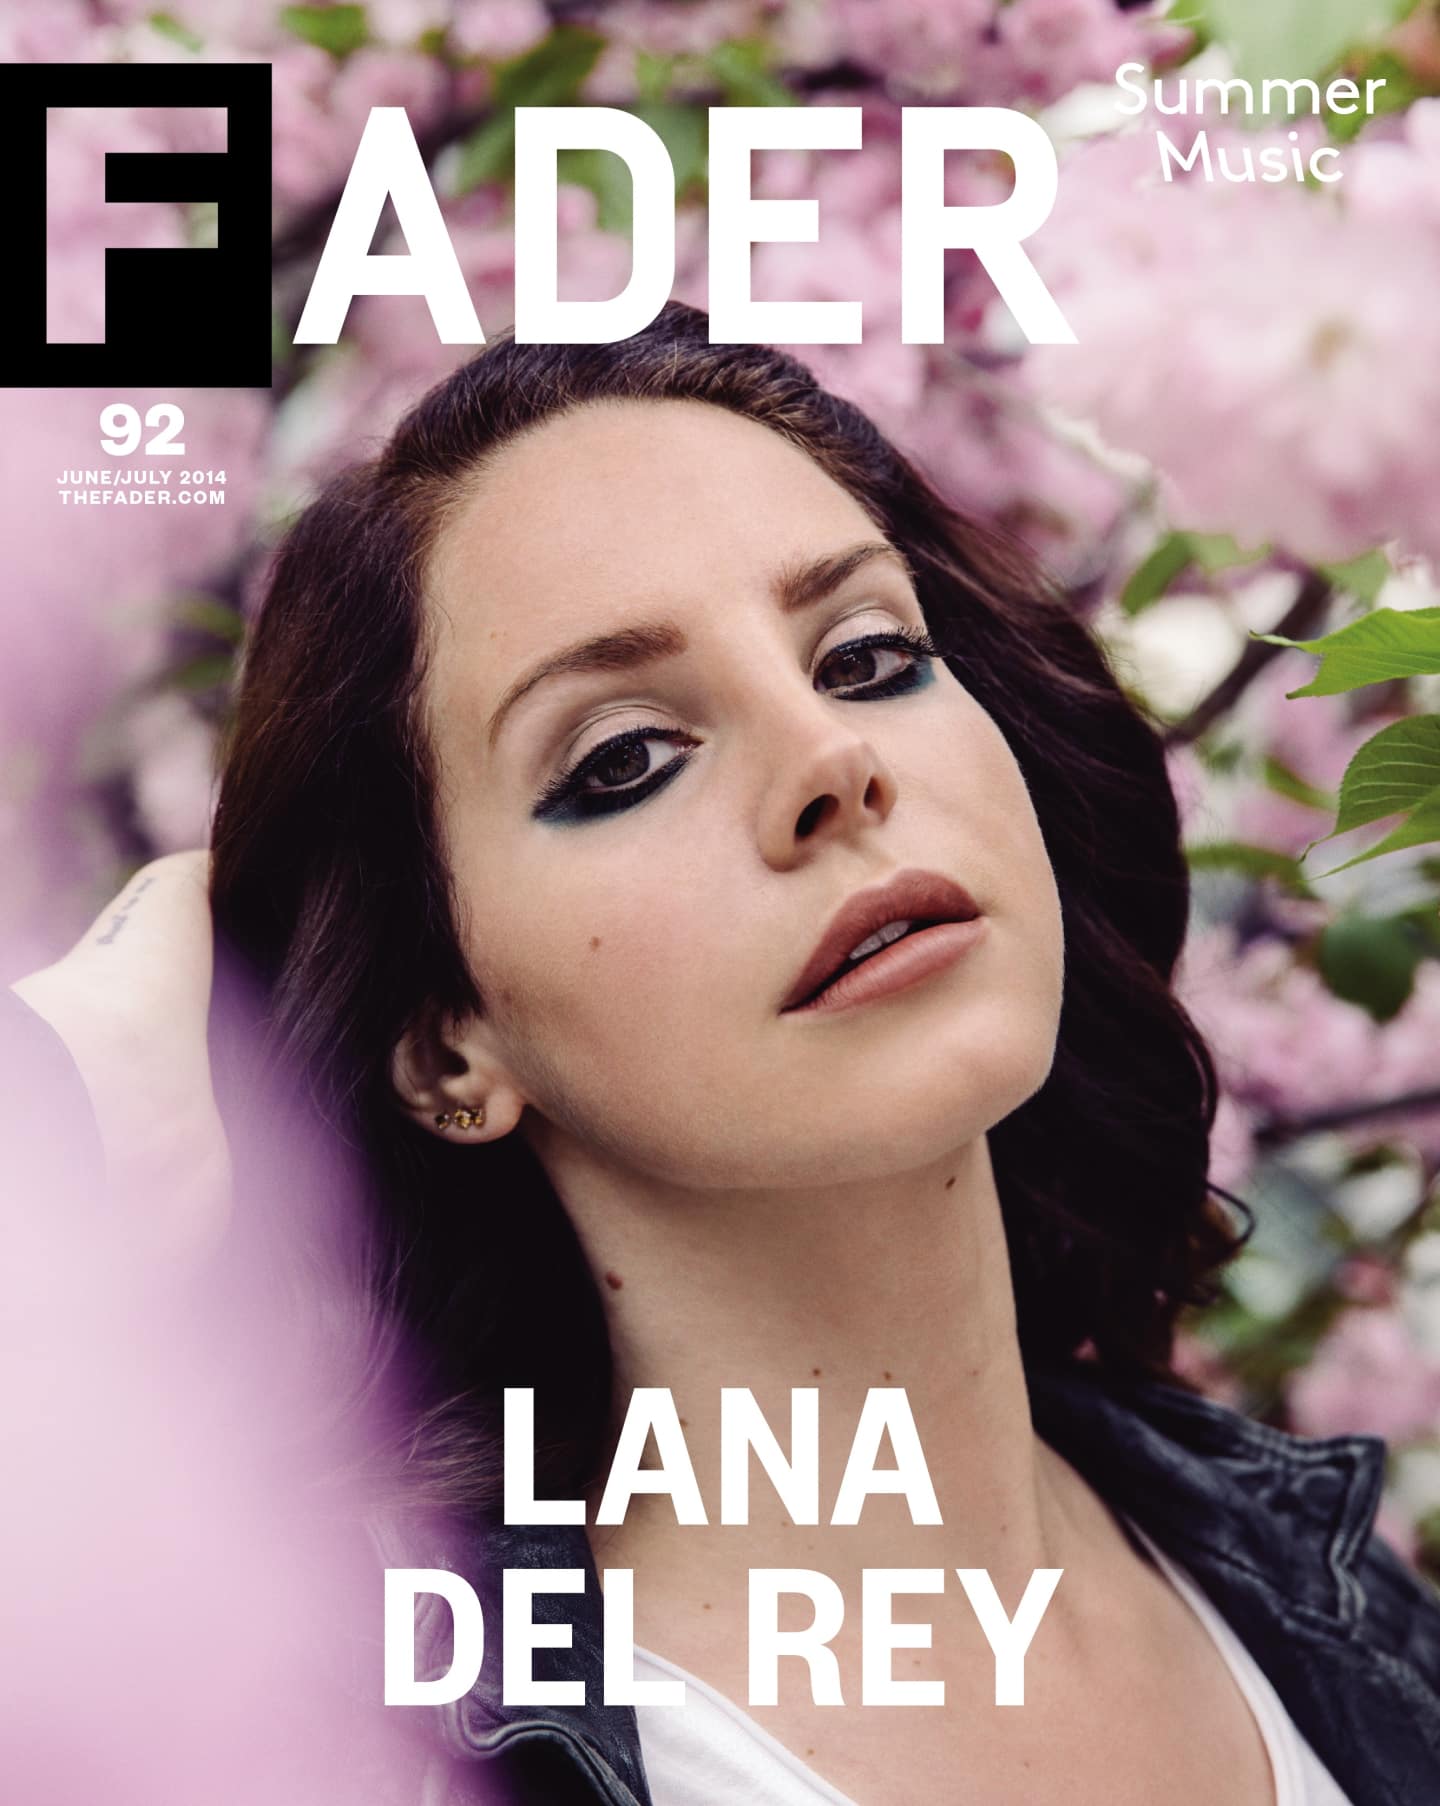 Lana Del Rey - The FADER cover